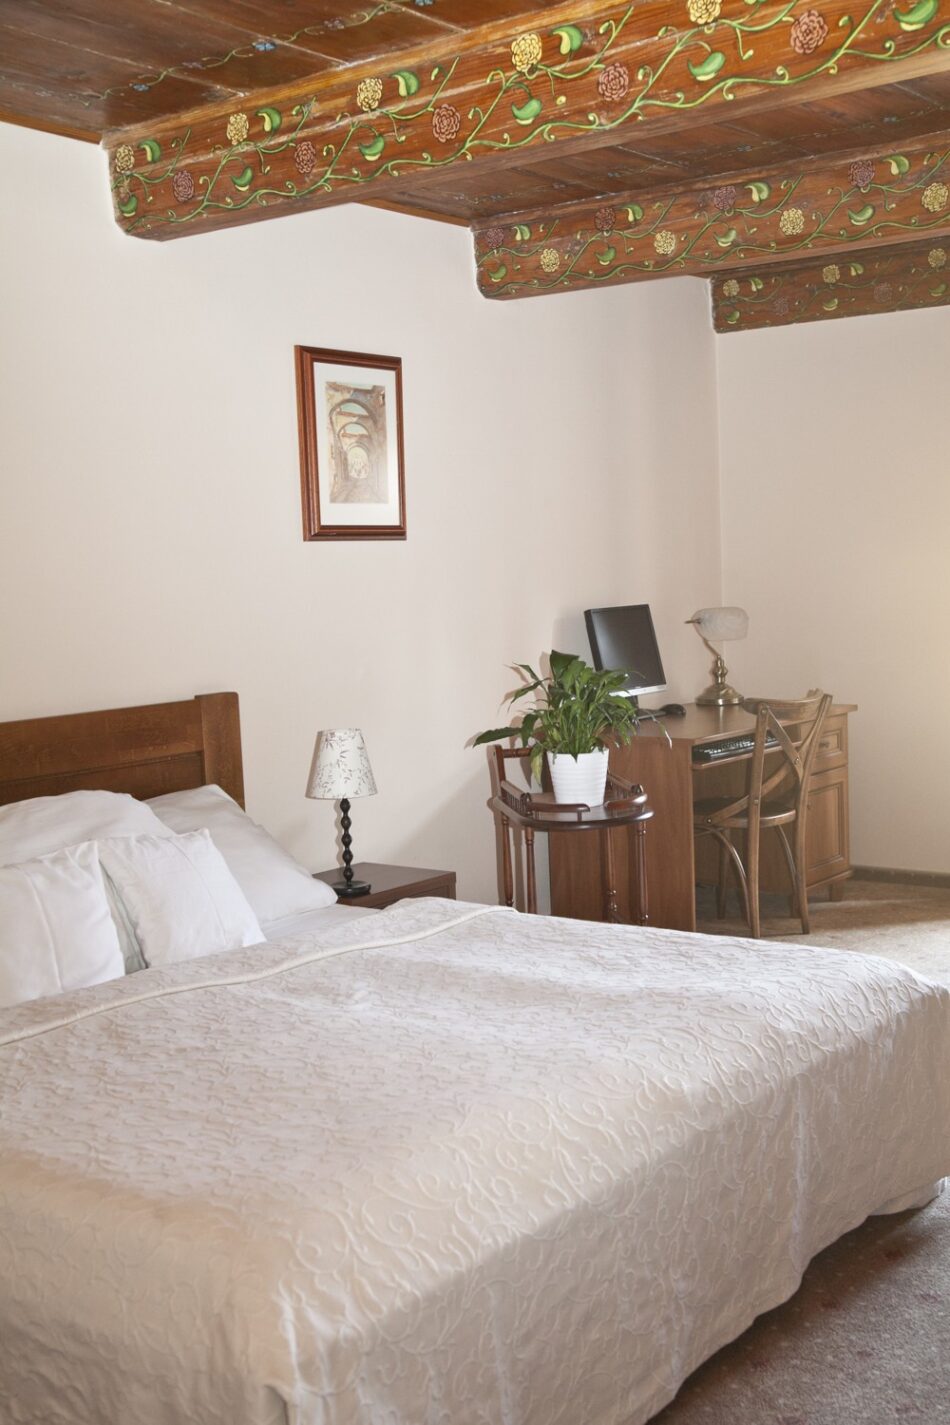 Double Room with Courtyard View (No. 6)